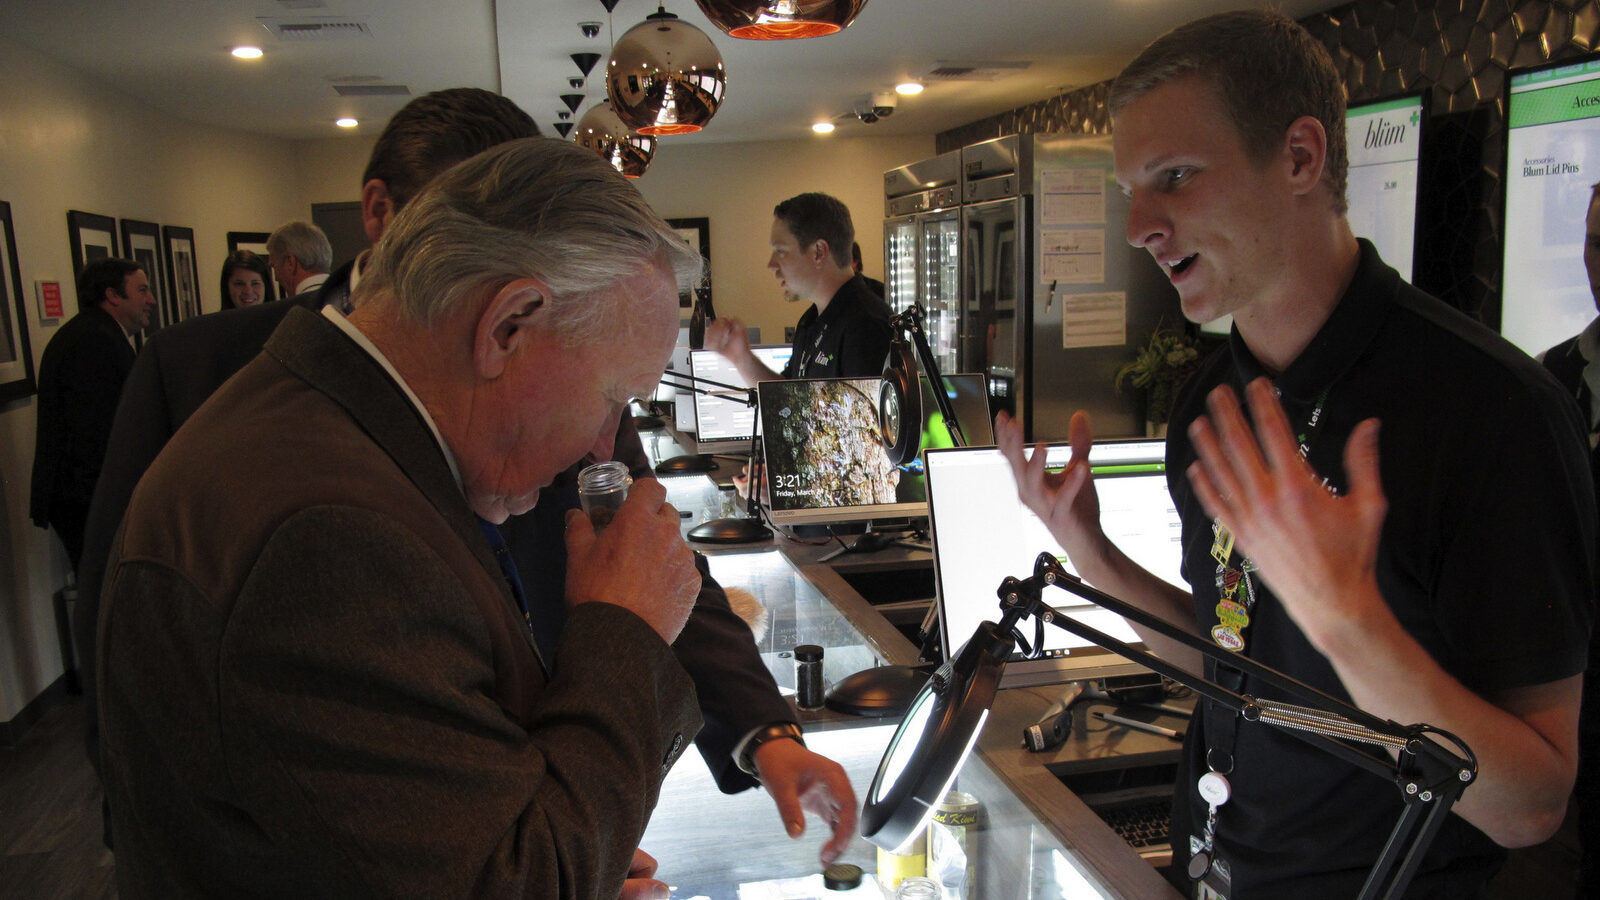 Nevada state Sen. Don Gustavson, R-Sparks, smells a sample of marijuana as Christopher Price, a ''budtender'' at the Blum medical marijuana dispensary in Reno, Nev. March 24, 2017. (AP/Scott Sonner)